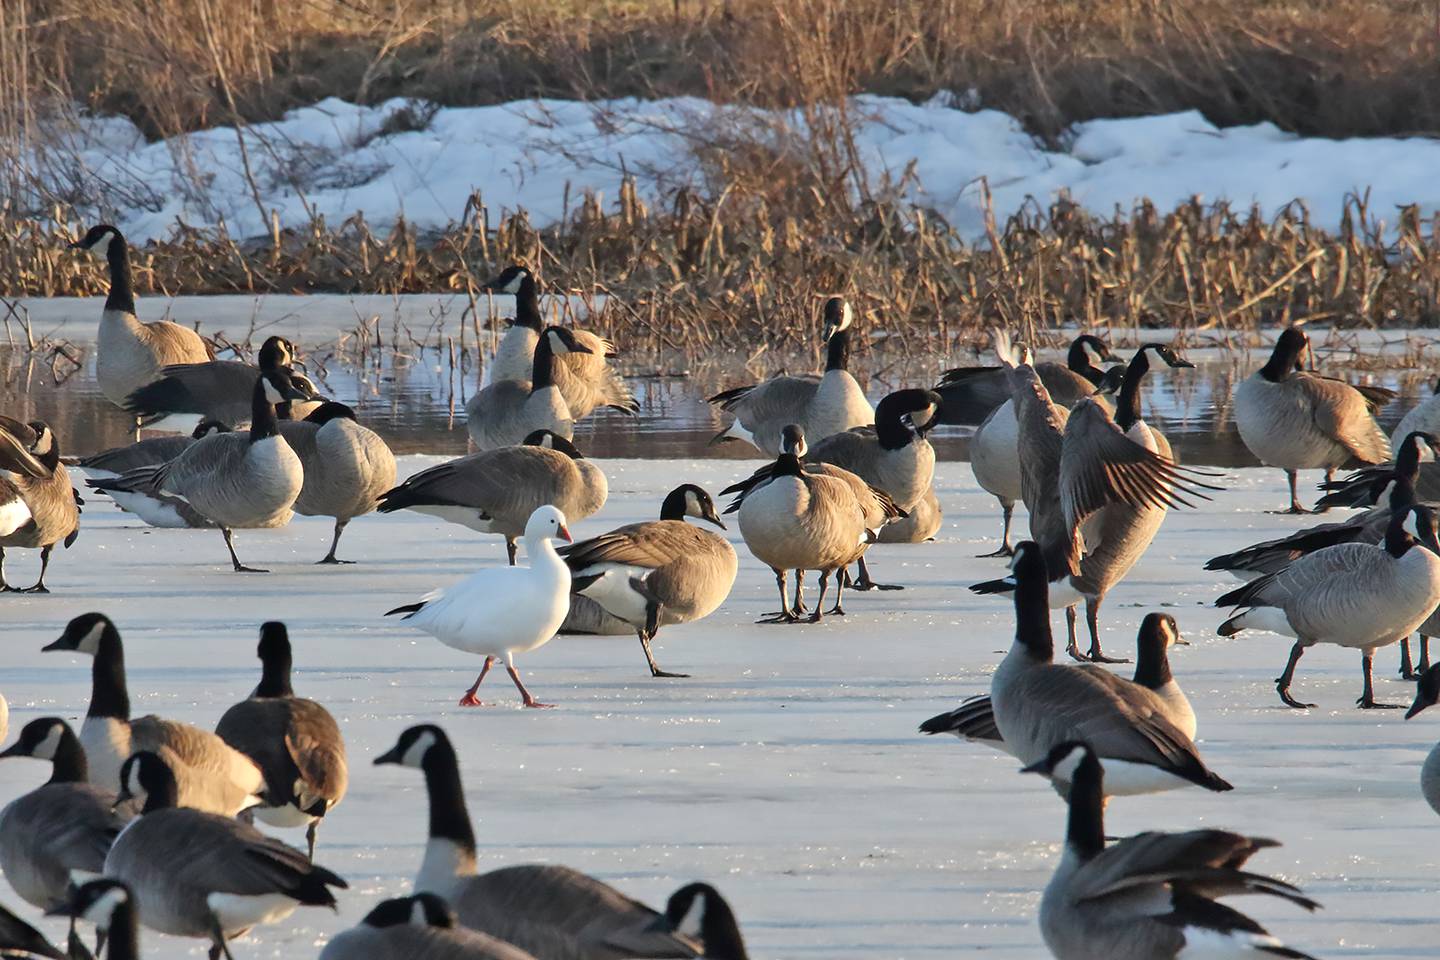 Smaller than most geese, the Ross’s goose is an unusual sighting in Kane County.